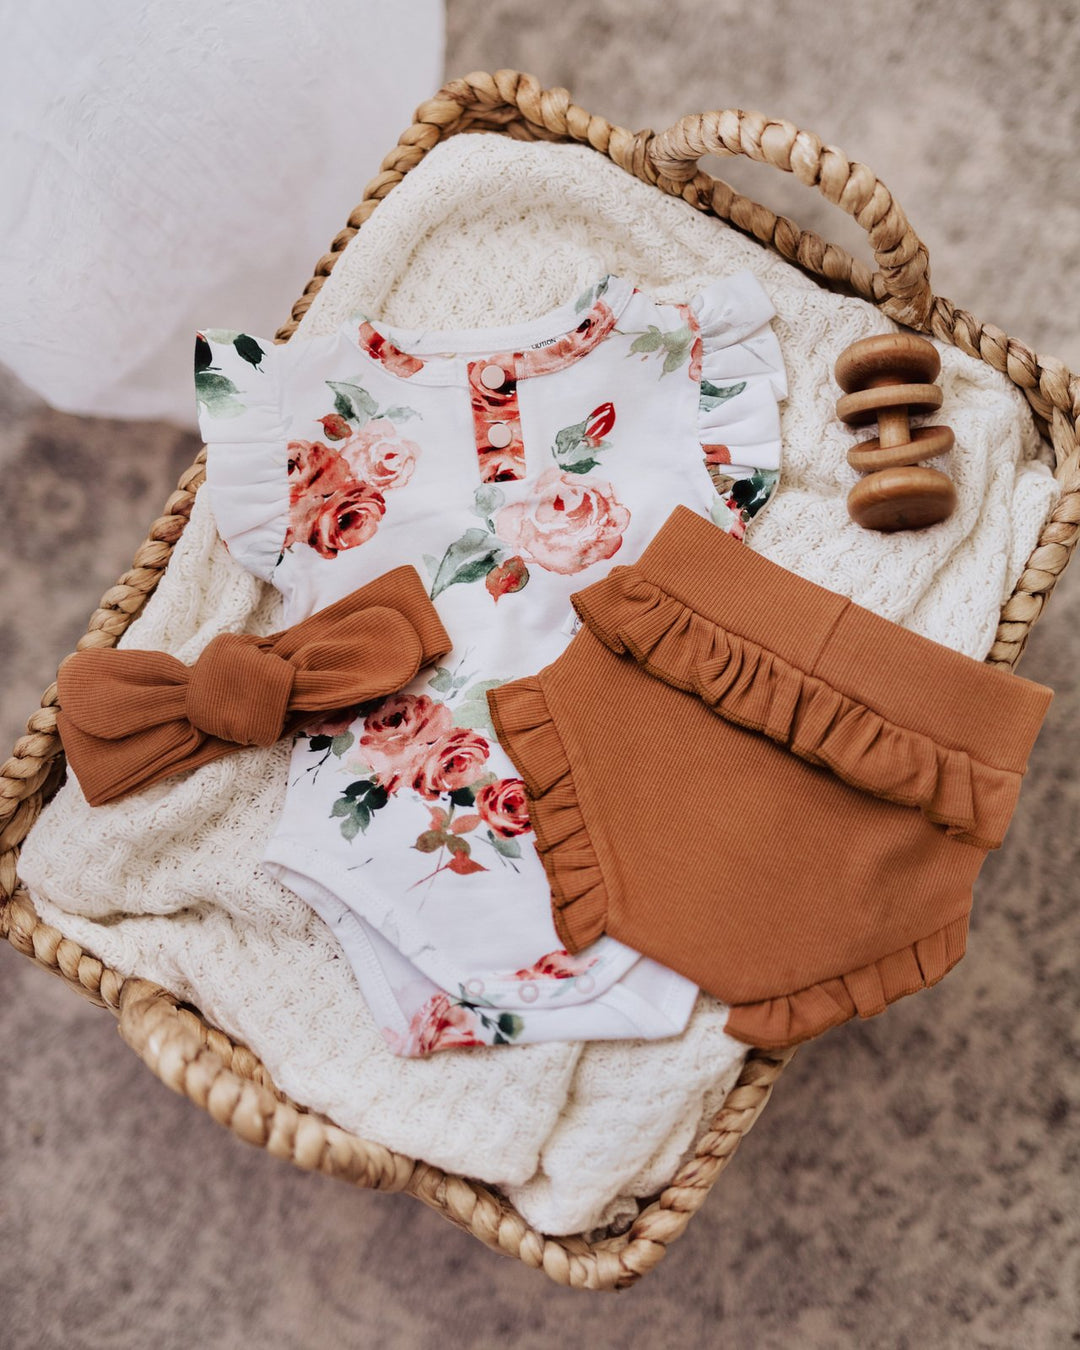 Snuggle Hunny Kids | Chestnut High Waisted Bloomers